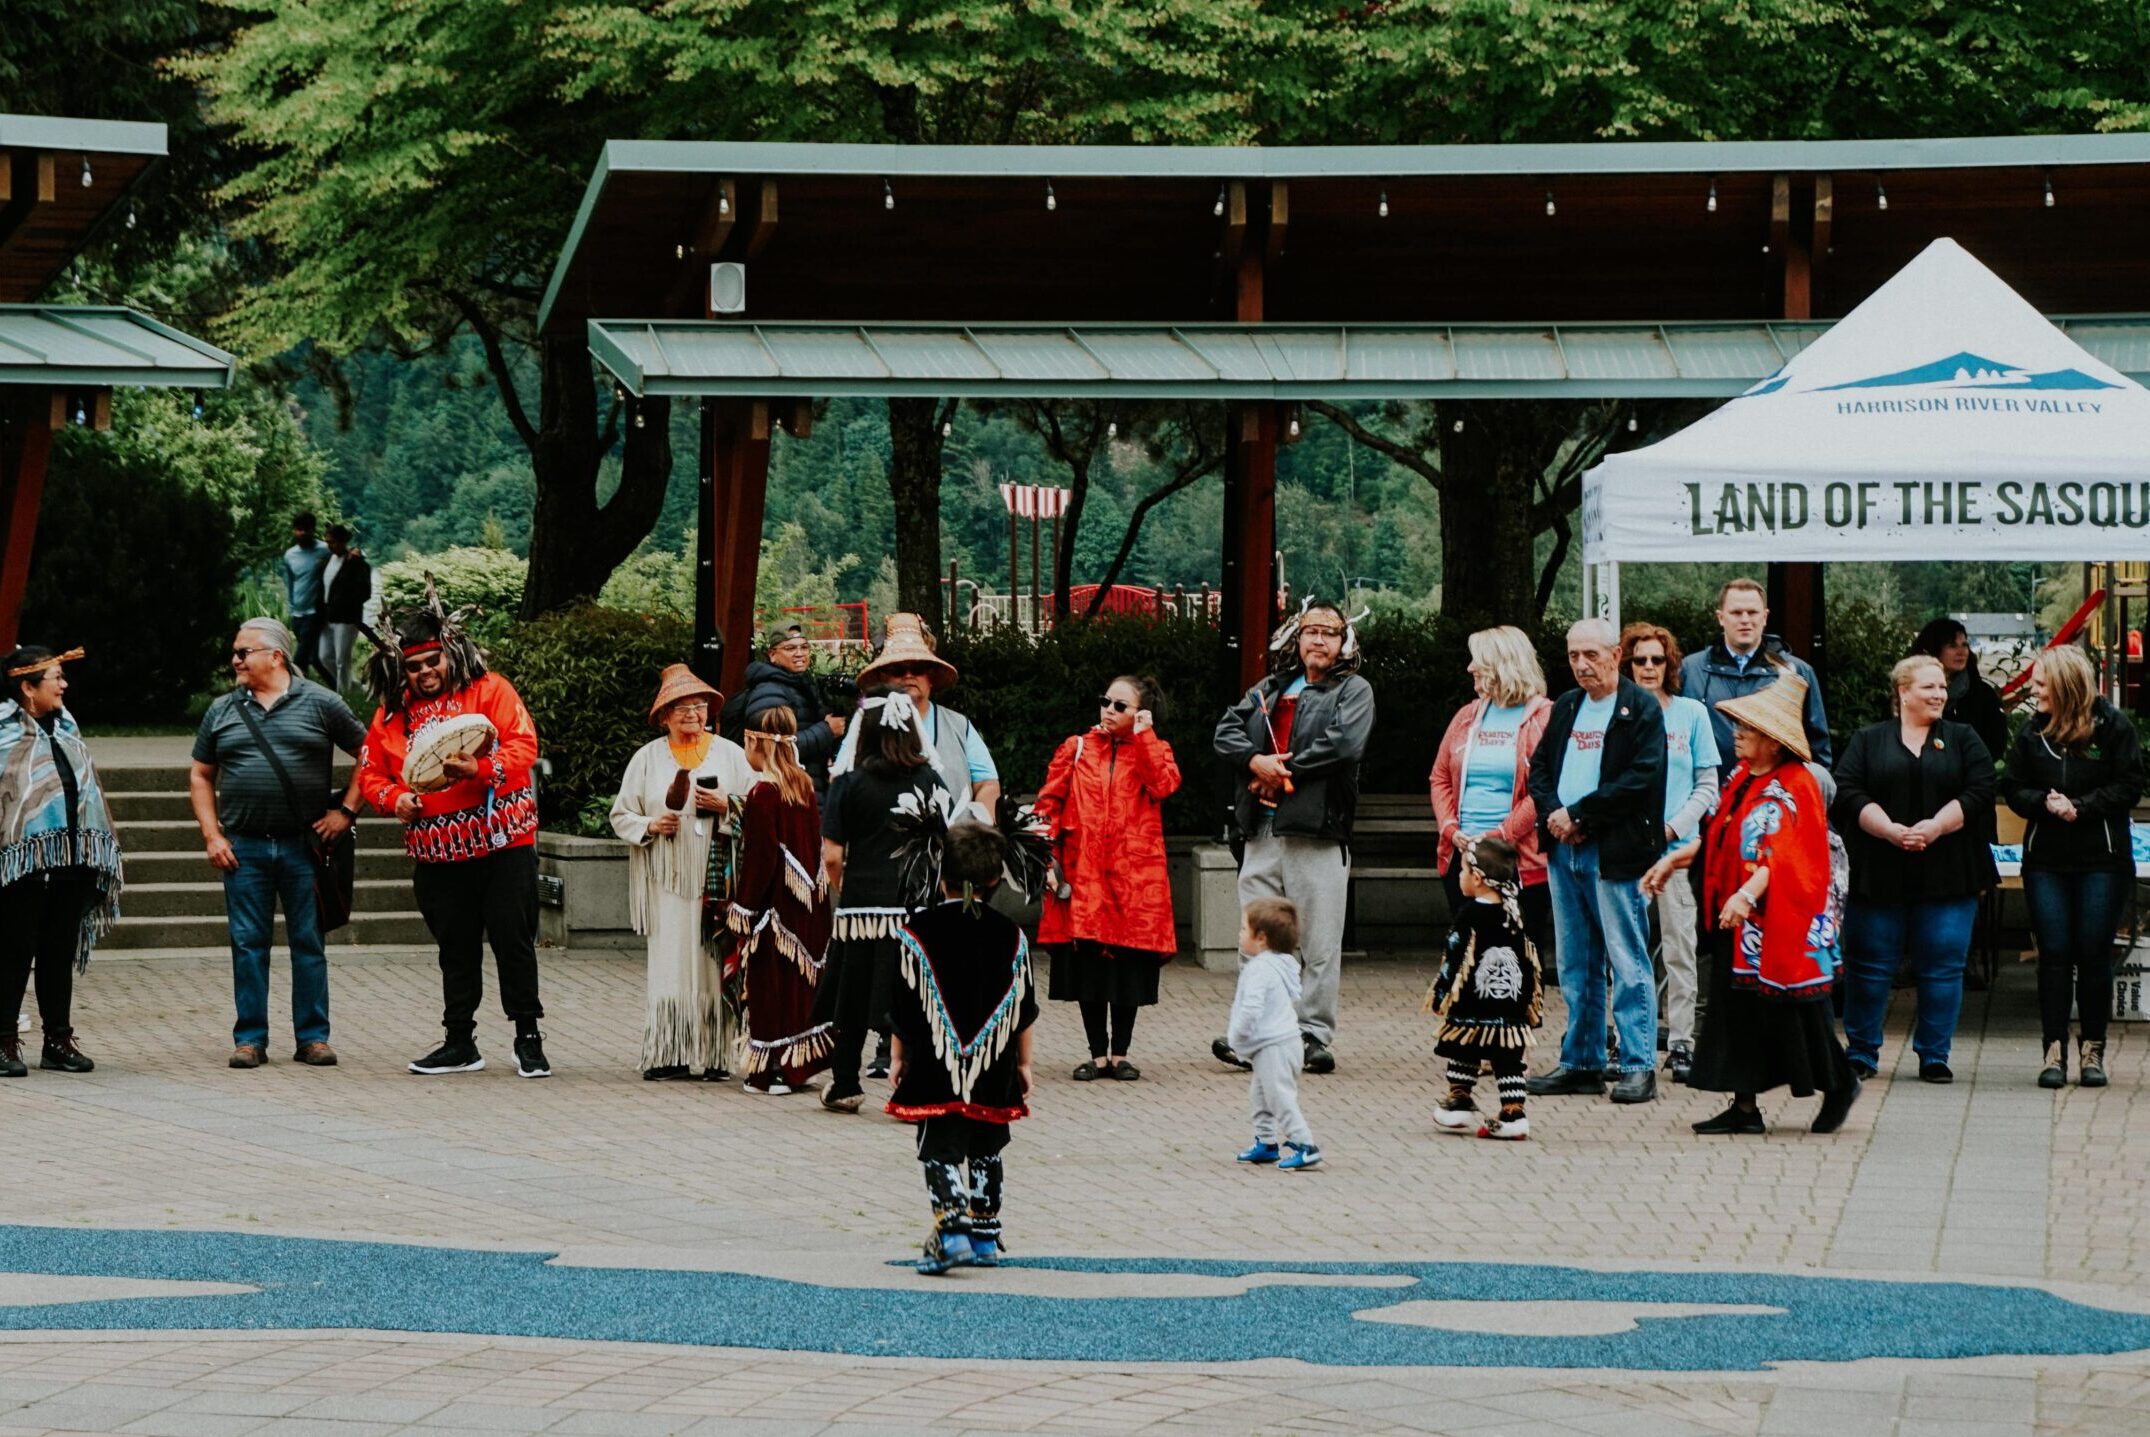 A group of people stand in a plaza, some wearing Indigenous regalia.